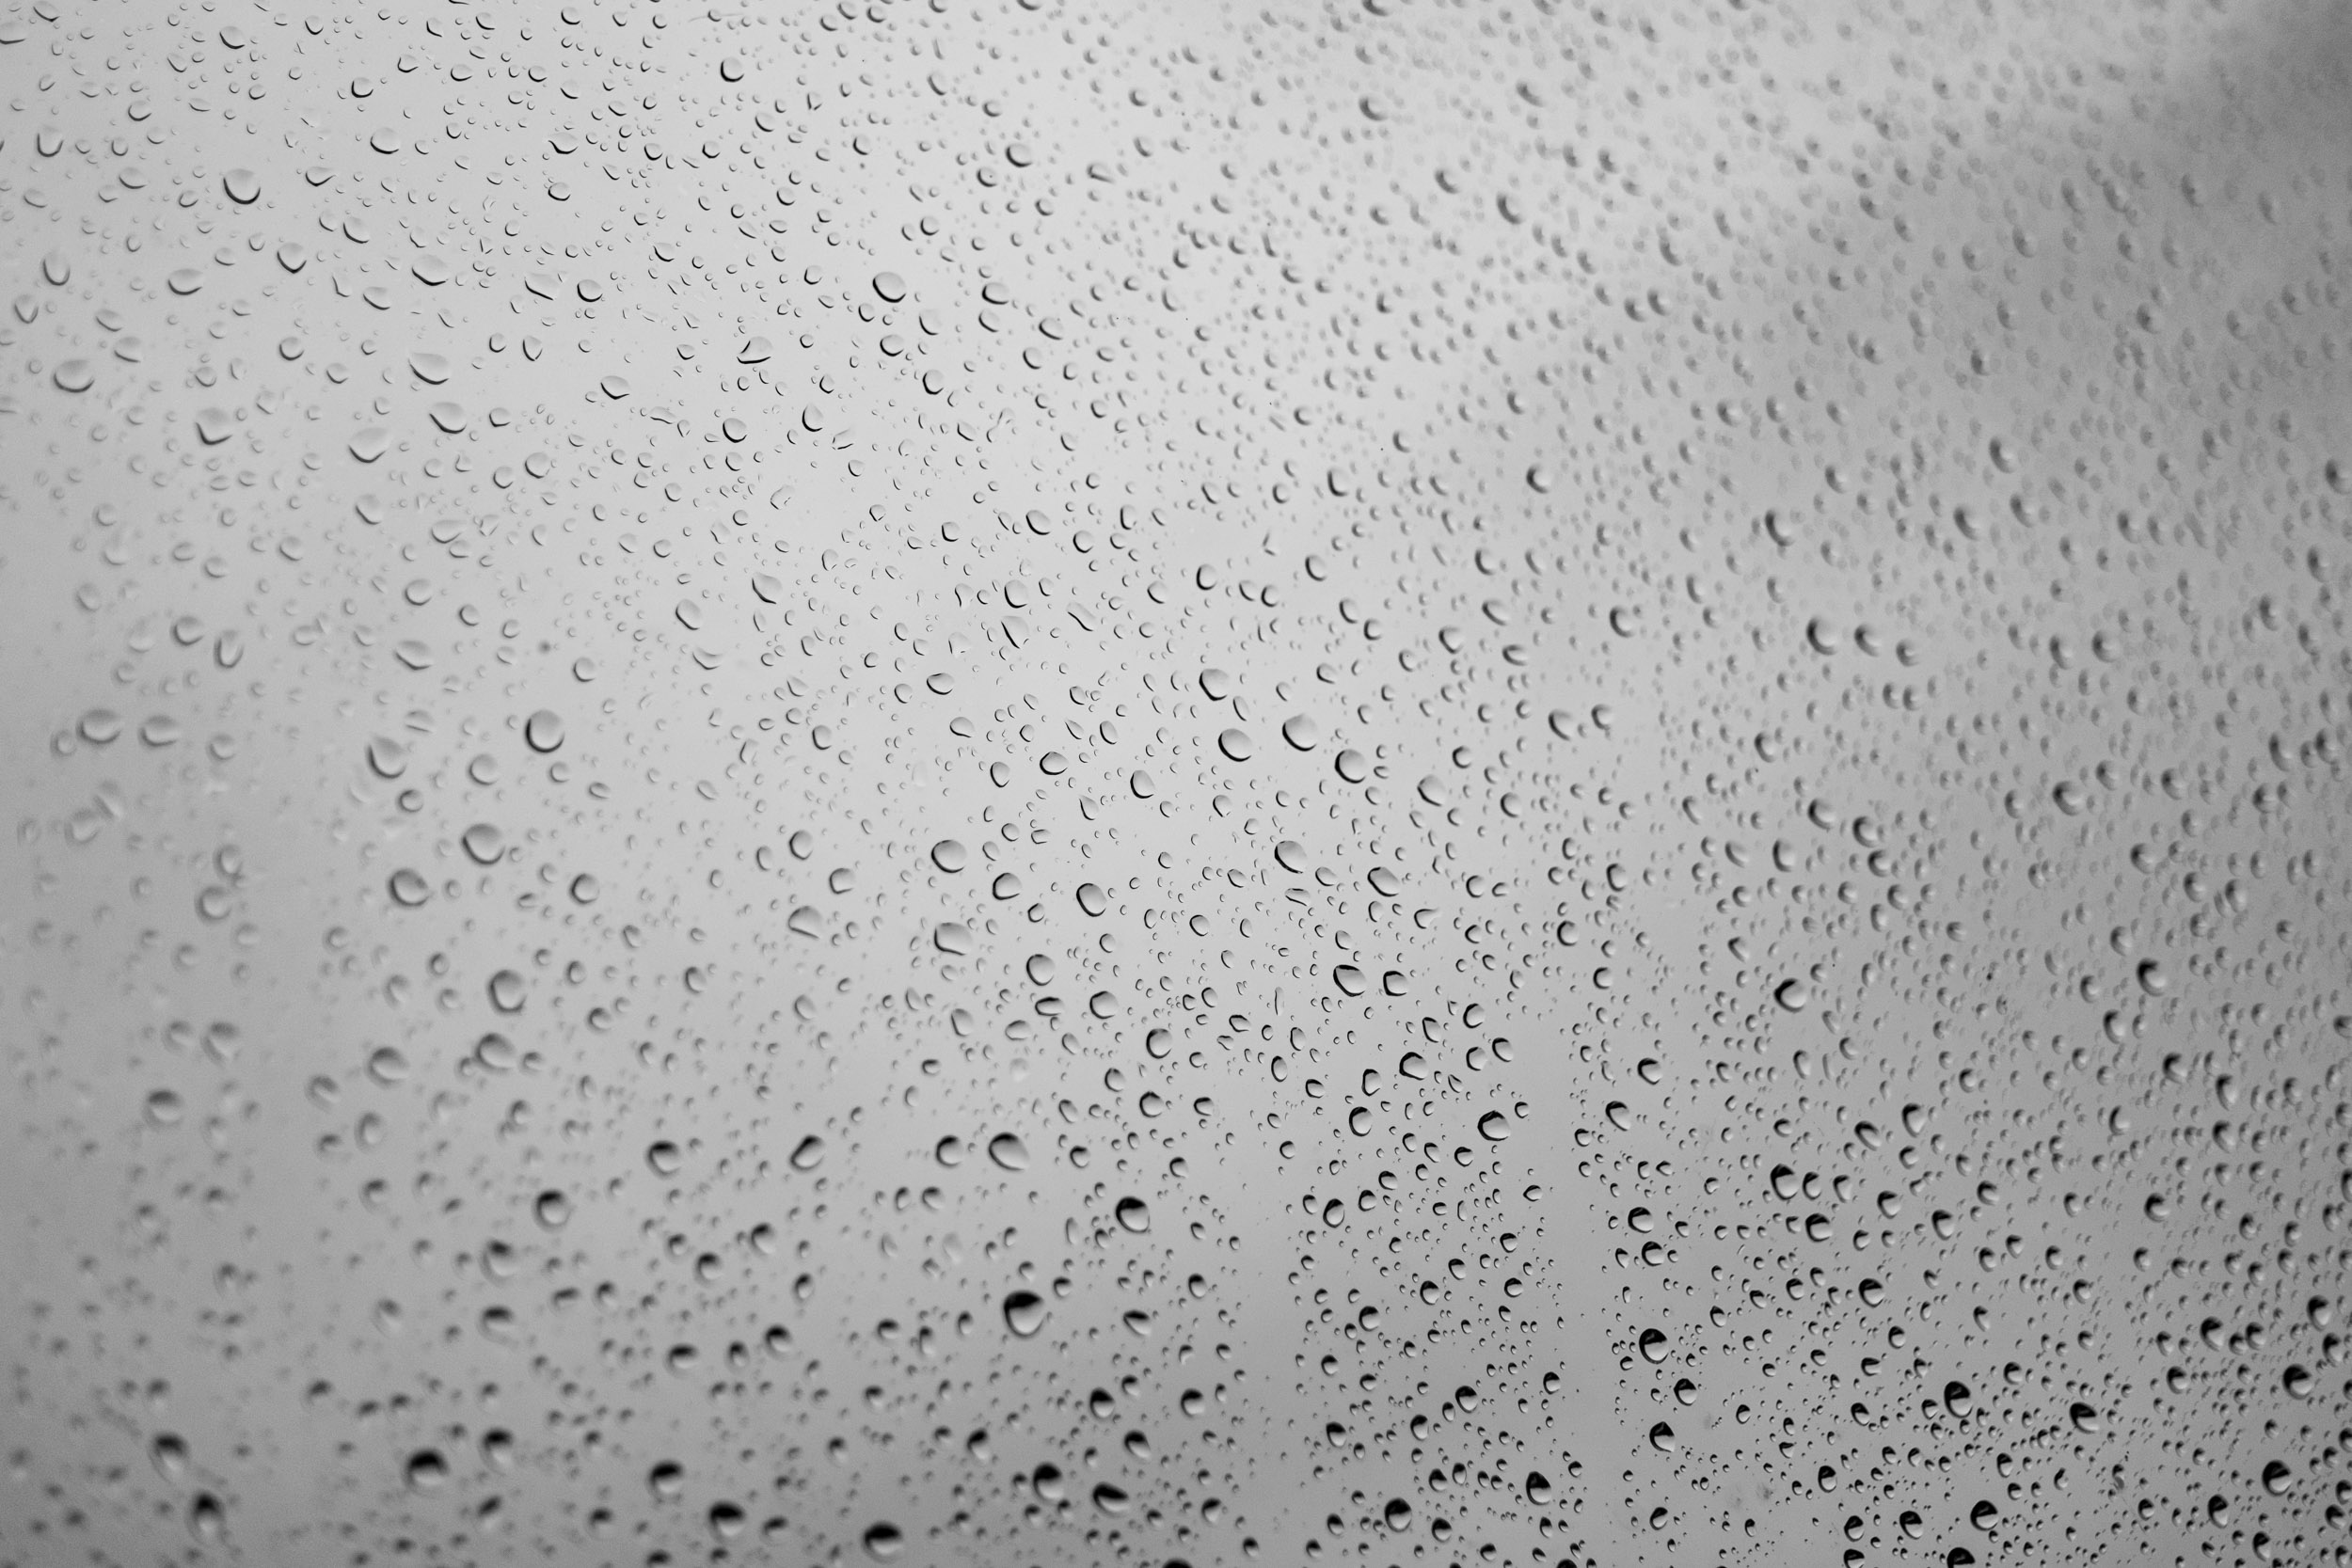 Raindrops on our window this morning.